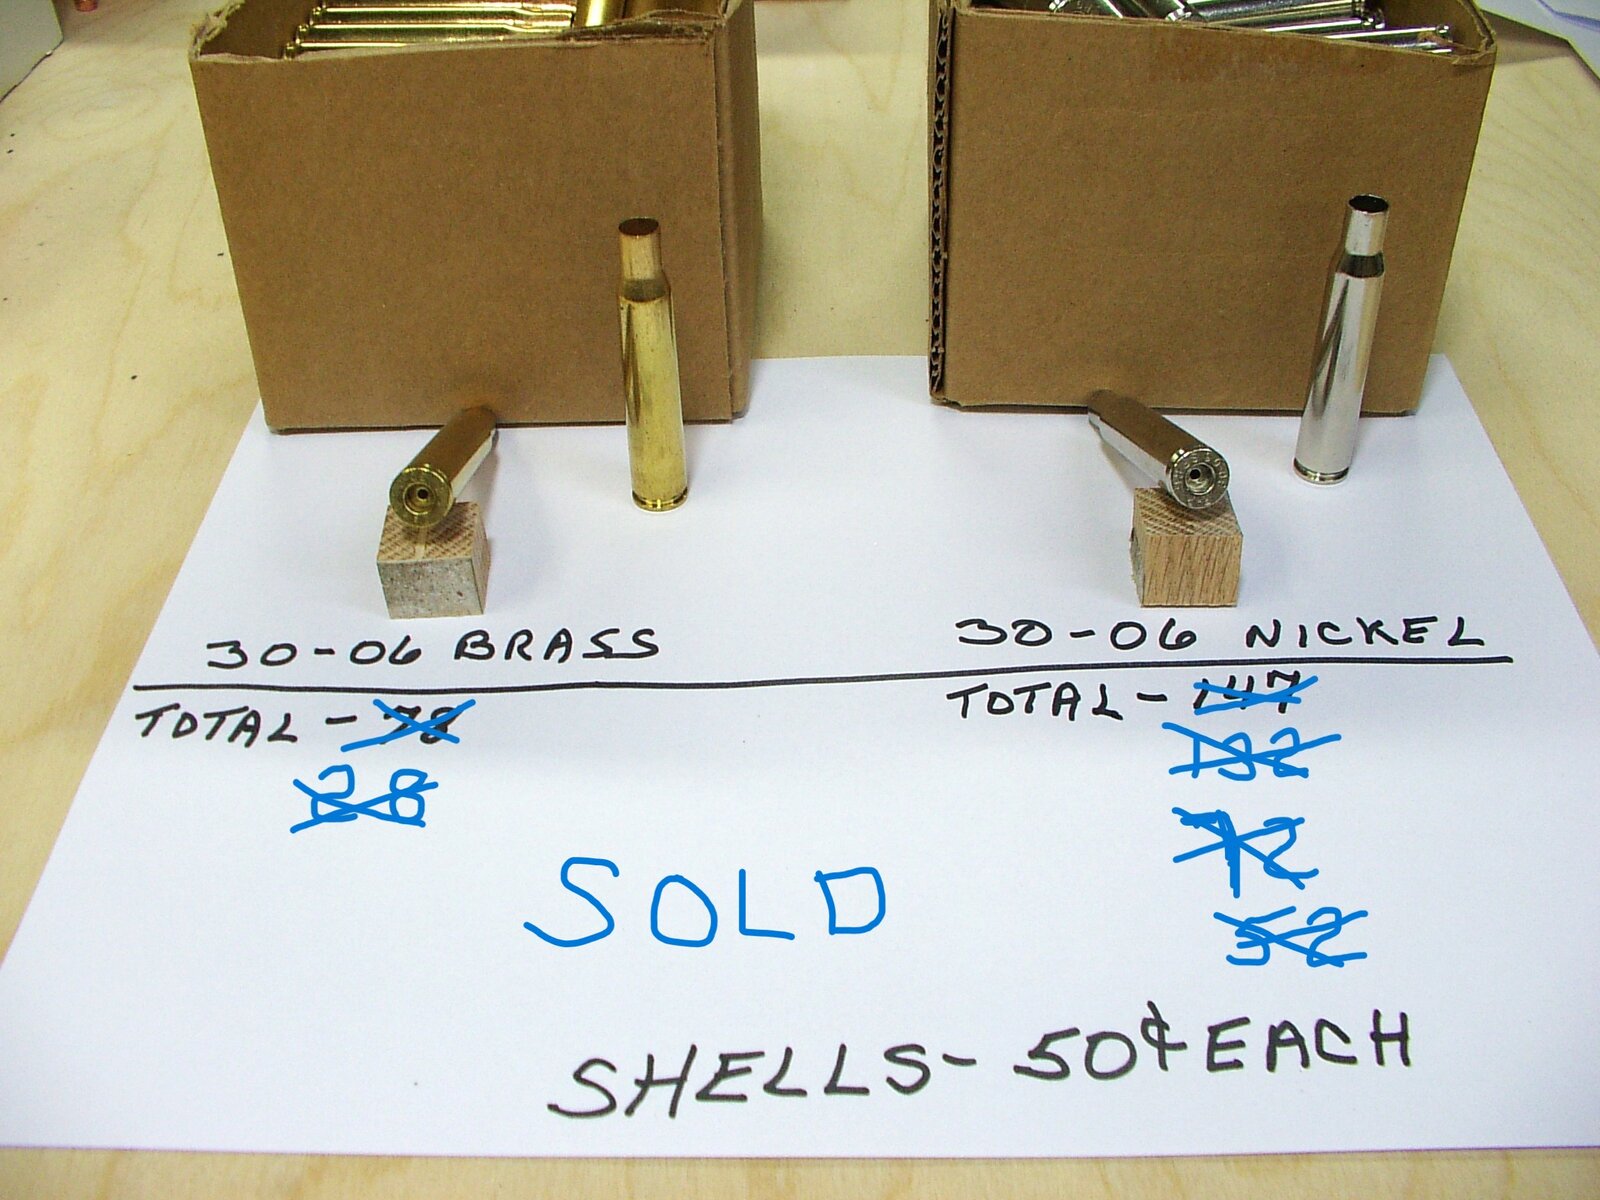 30-06 shells.JPG with new count#1.JPG new count #2.JPG#3new.JPG final sales count sold.JPG